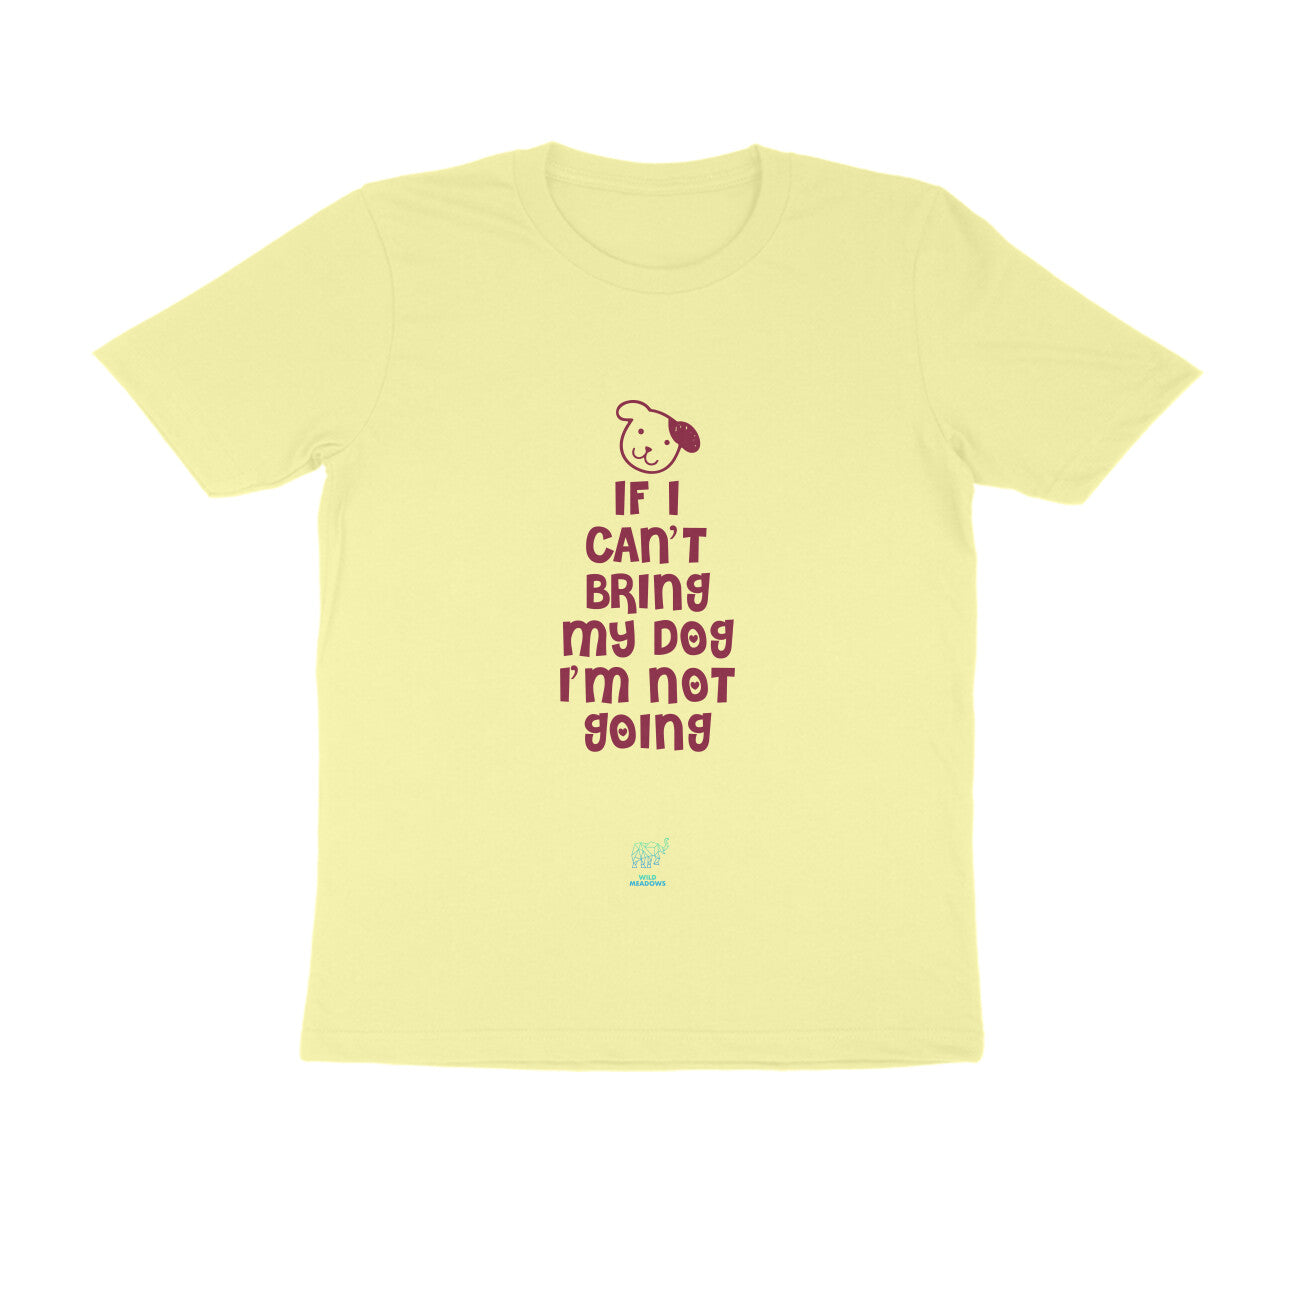 If I can't bring my dog-Round Neck Unisex Tee